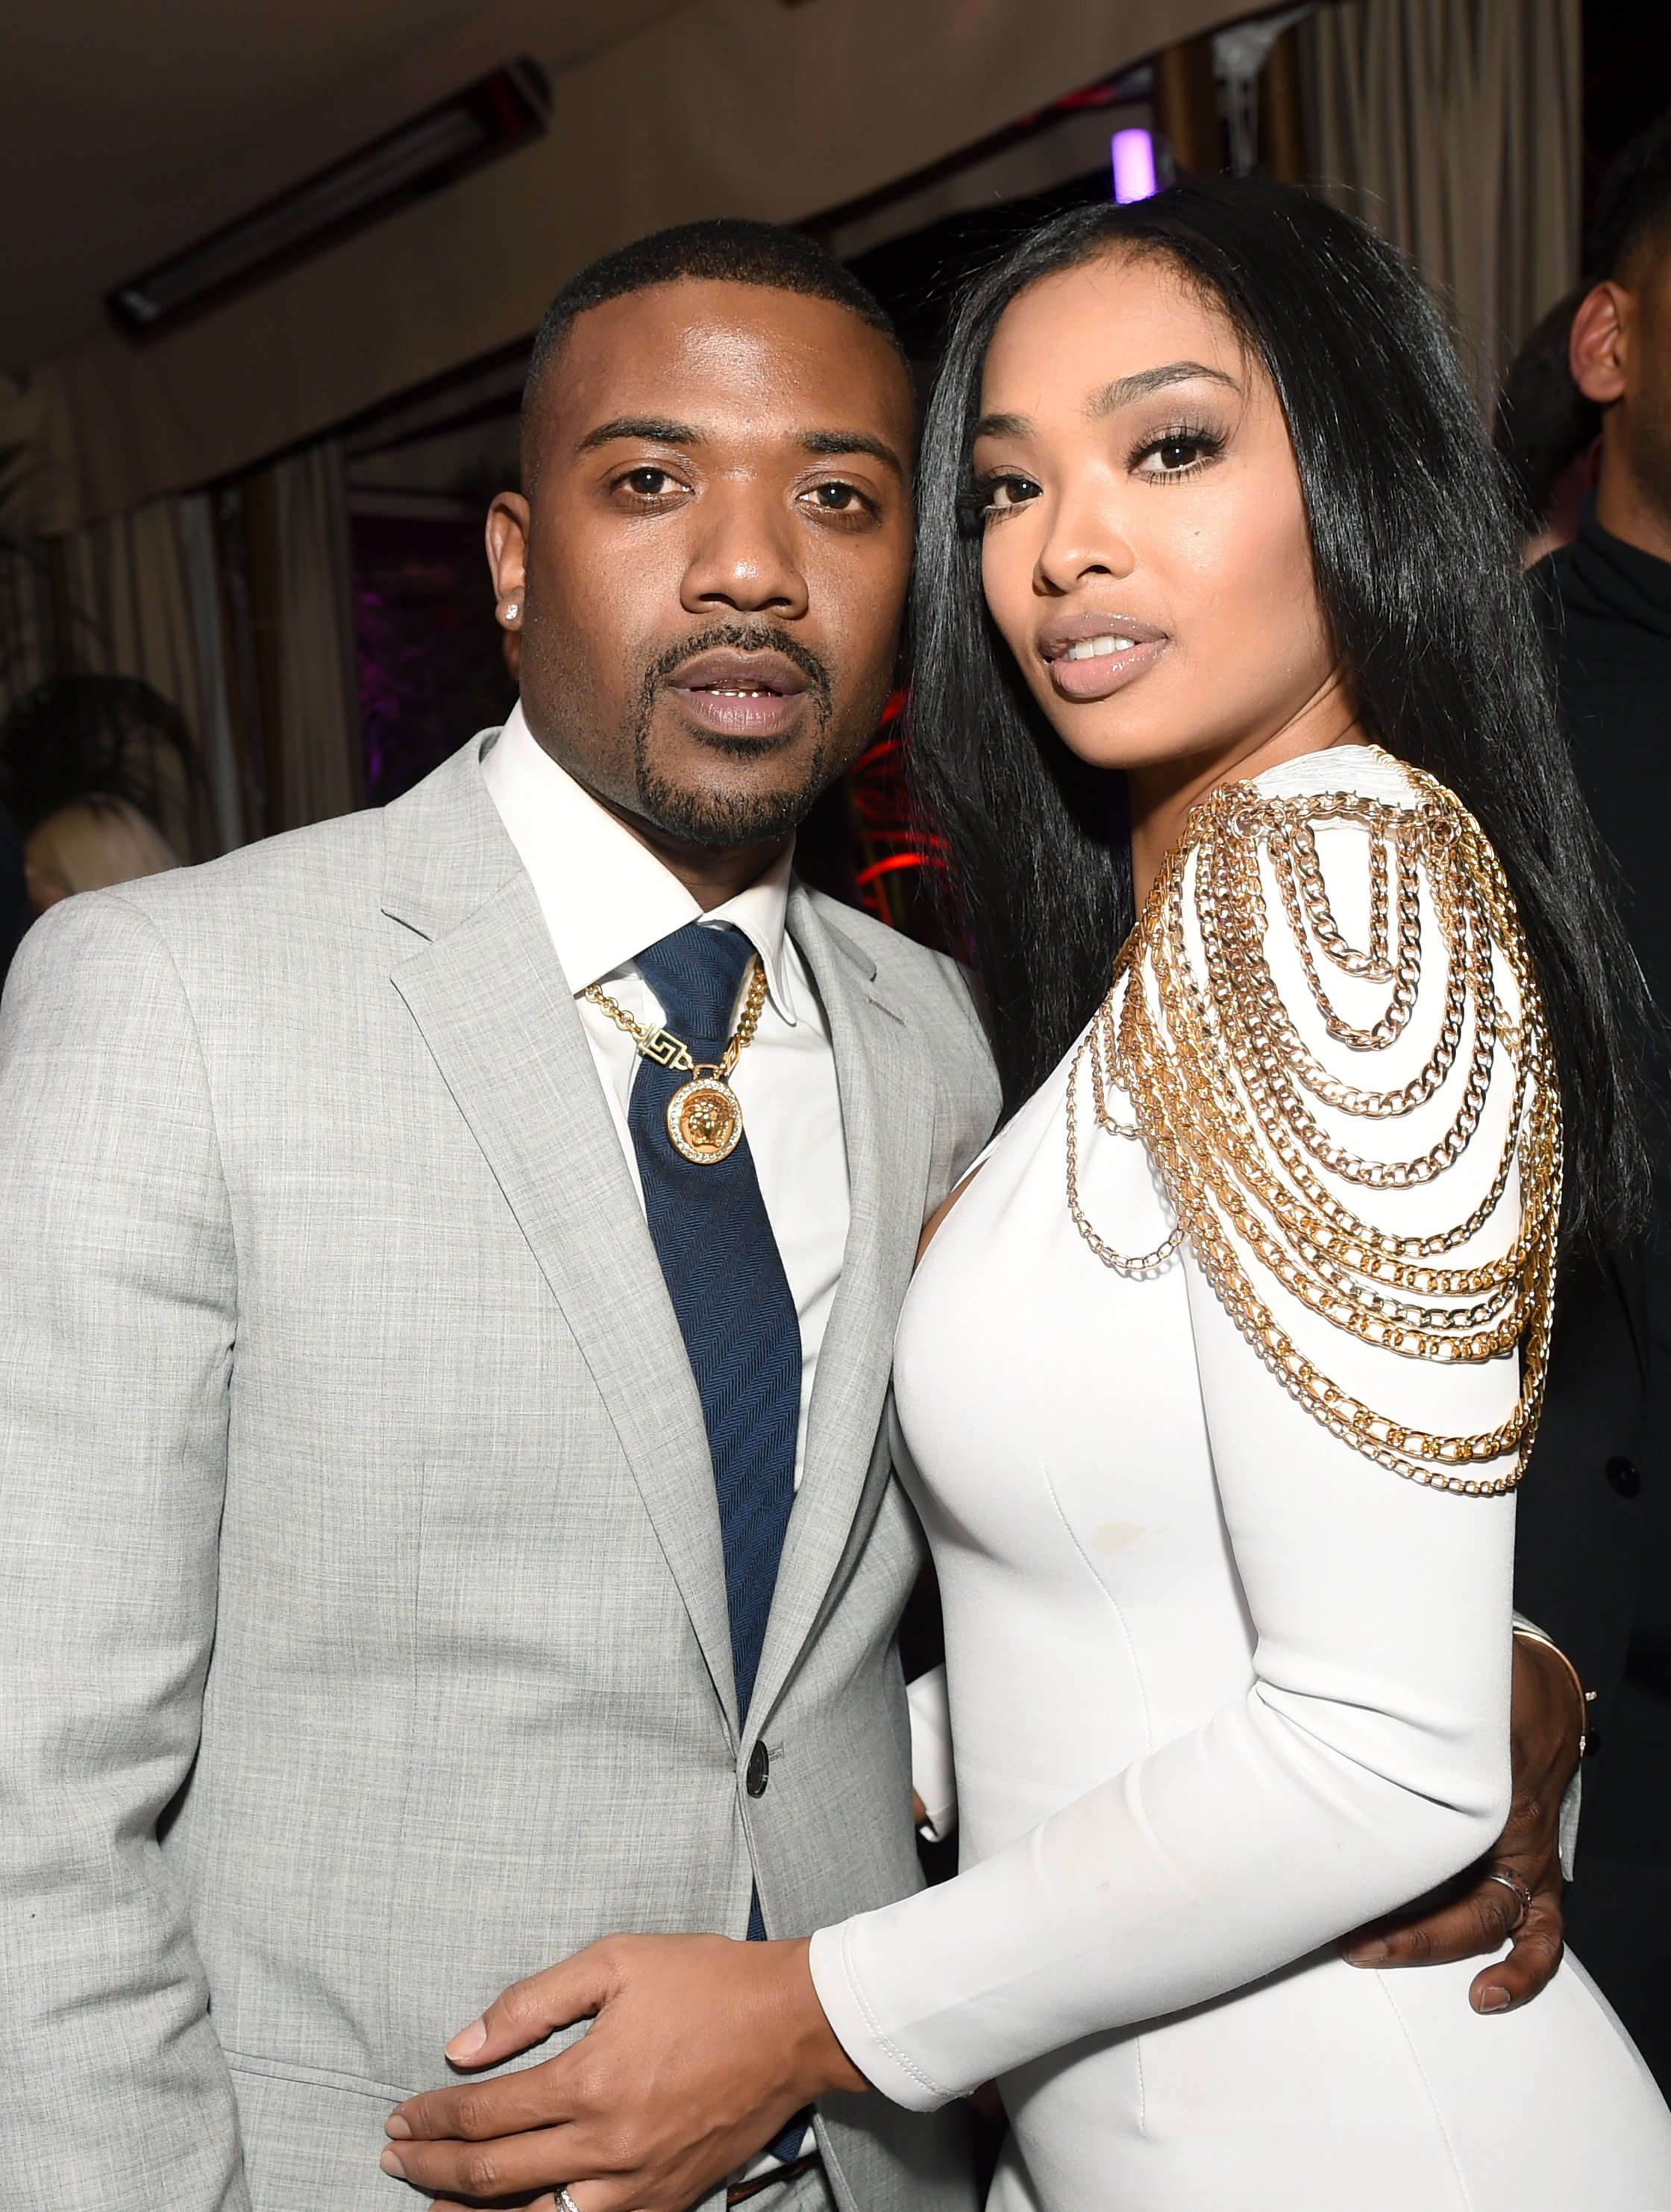 Ray J & Princess Love at Chateau Marmont in Los Angeles, California on February 12, 2017.  | Photo: Getty Images